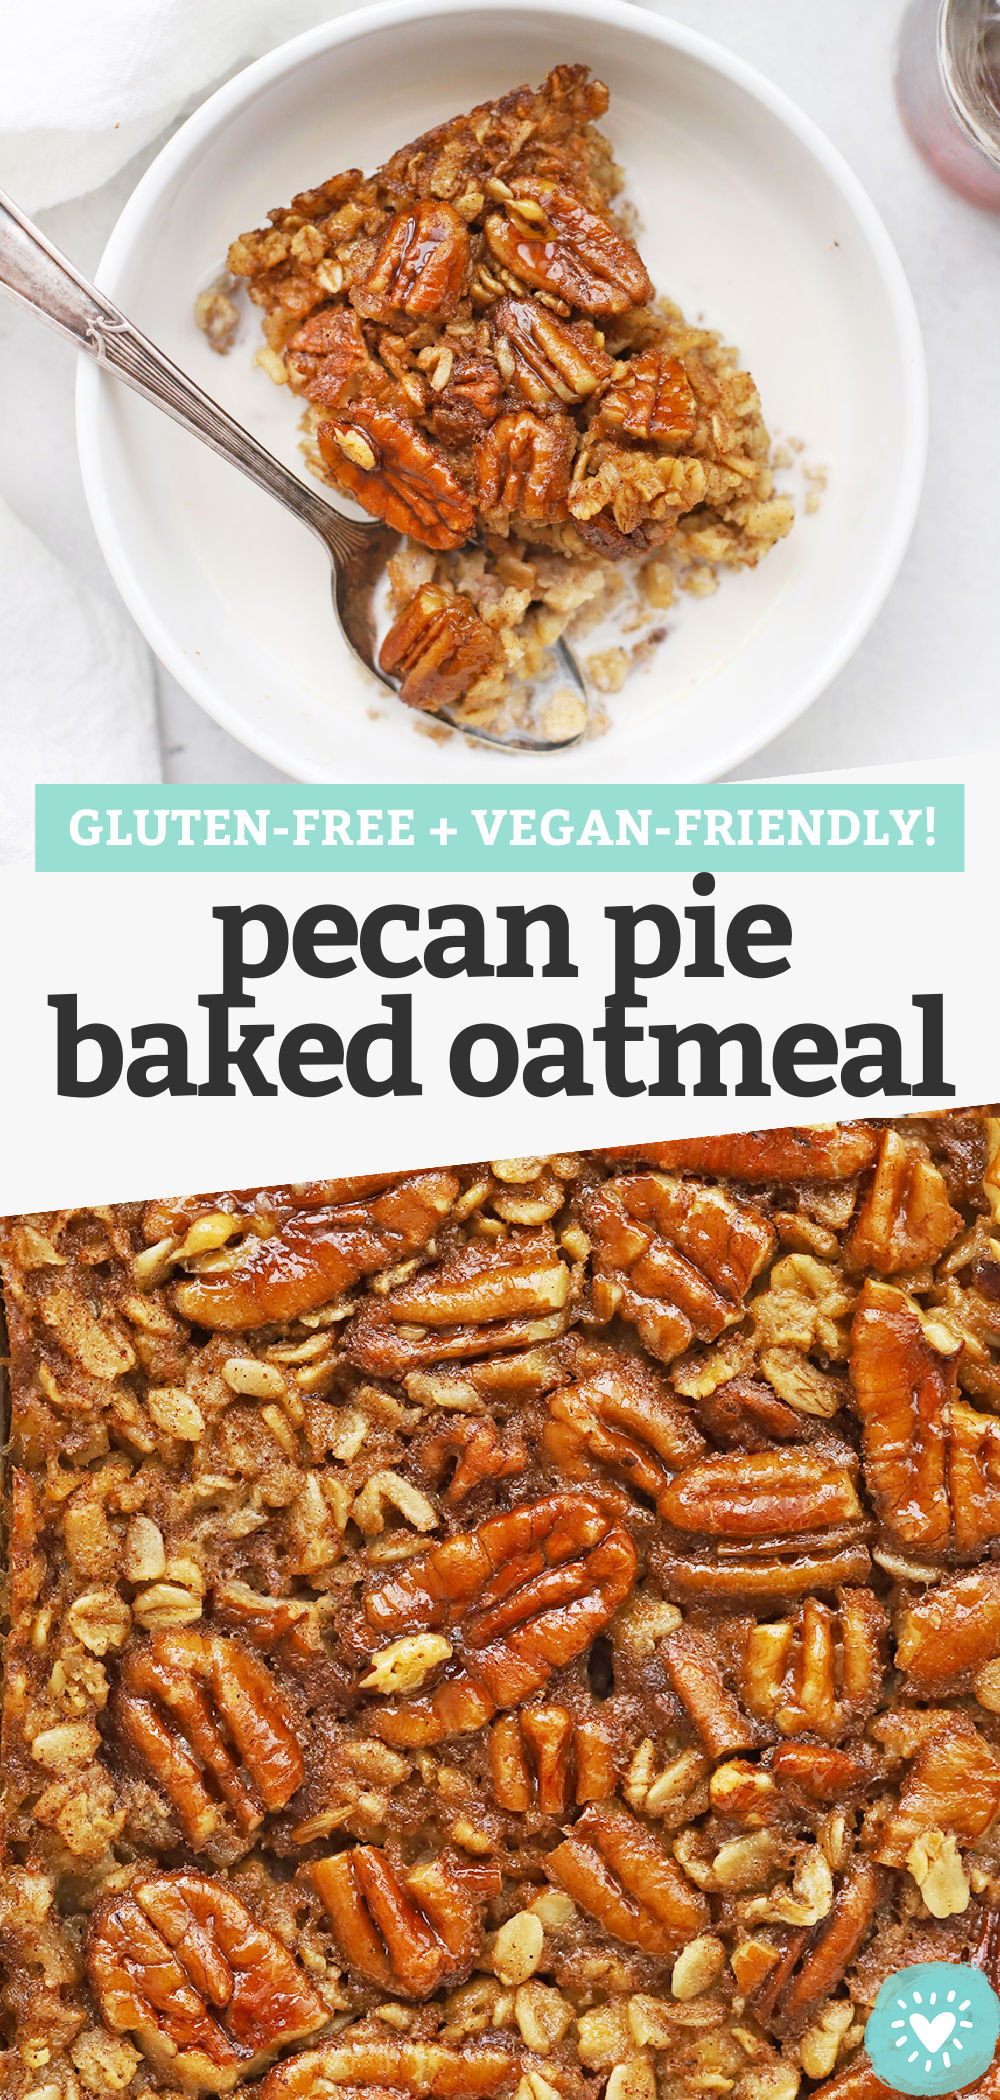 Pecan Pie Baked Oatmeal - This cozy pecan baked oatmeal recipe has notes of cinnamon, vanilla, maple, and pecans to make a delicious meal-prep breakfast your whole family will fall in love with. (Gluten-Free, Vegan-Friendly) // cinnamon pecan oatmeal // baked oatmeal recipe // meal prep breakfast // fall recipe // vegan breakfast // gluten-free breakfast #glutenfree #vegan #bakedoatmeal #oatmeal